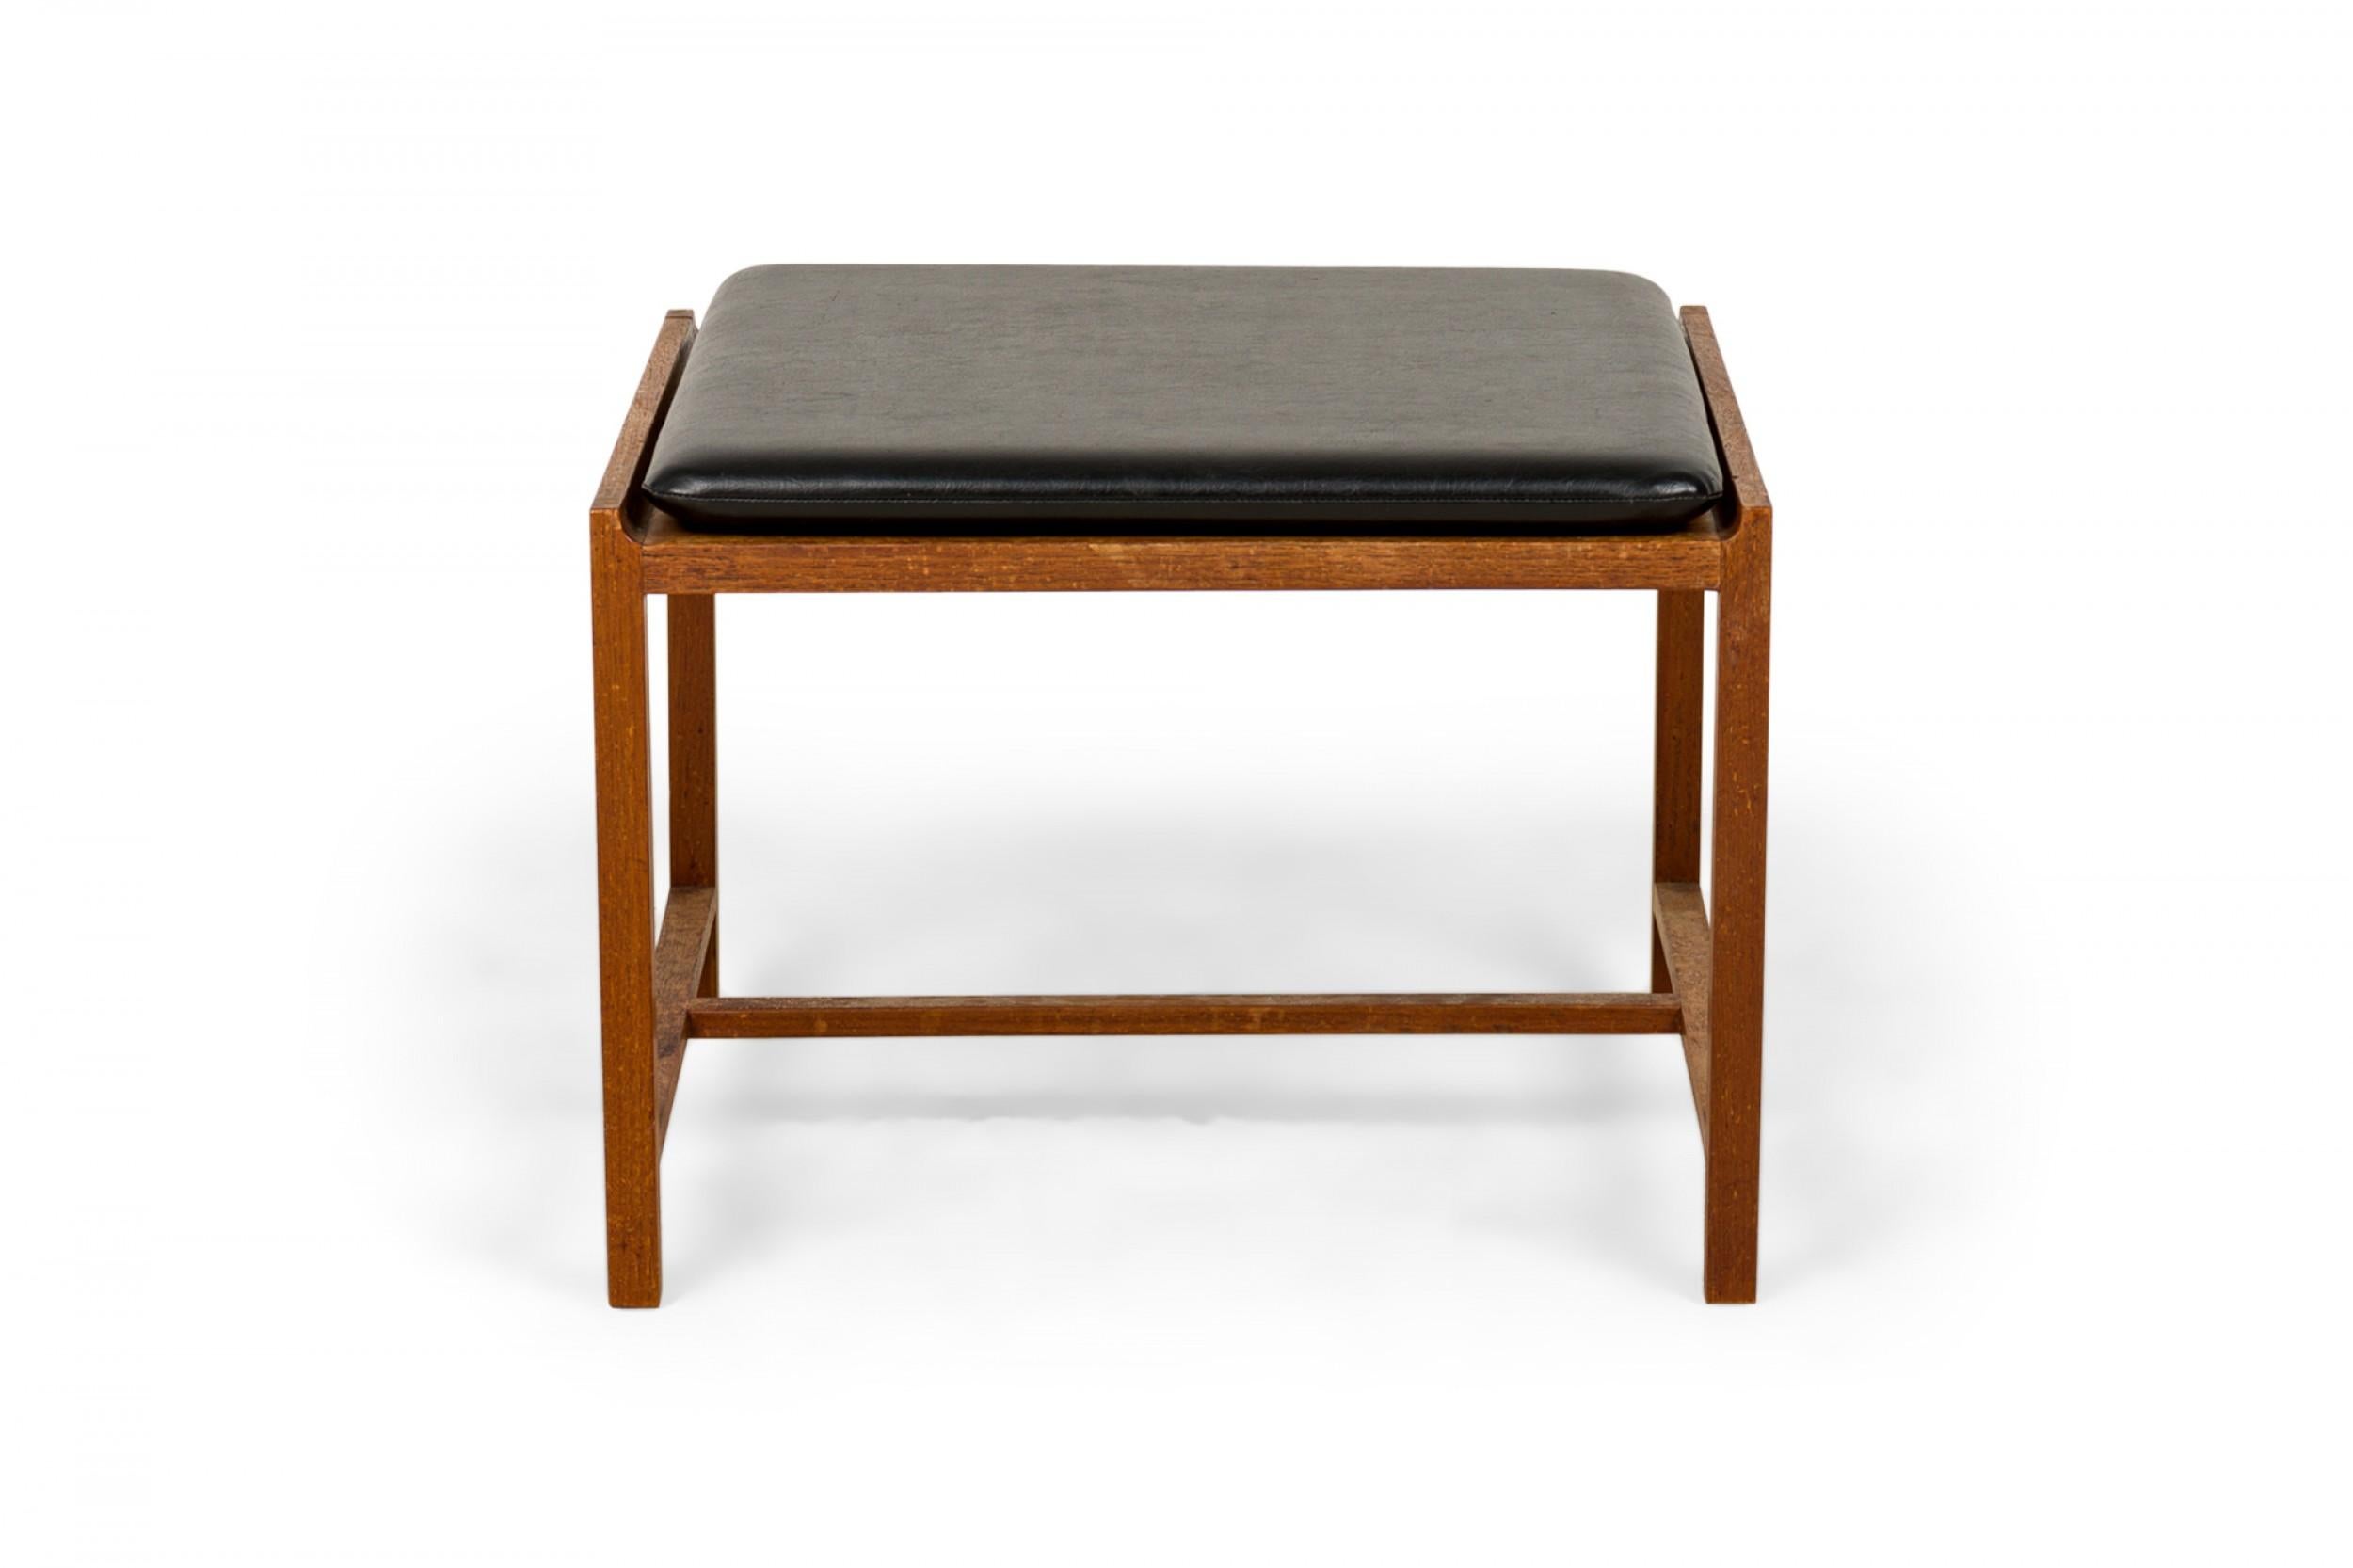 SET of 3 Norwegian Mid-Century low stools / side tables with rectangular walnut frames with stretcher bases, topped with black leather upholstered seats / tops. (INGMAR RELLING FOR BROTHERS BINDEIM)(PRICED AS SET).
 